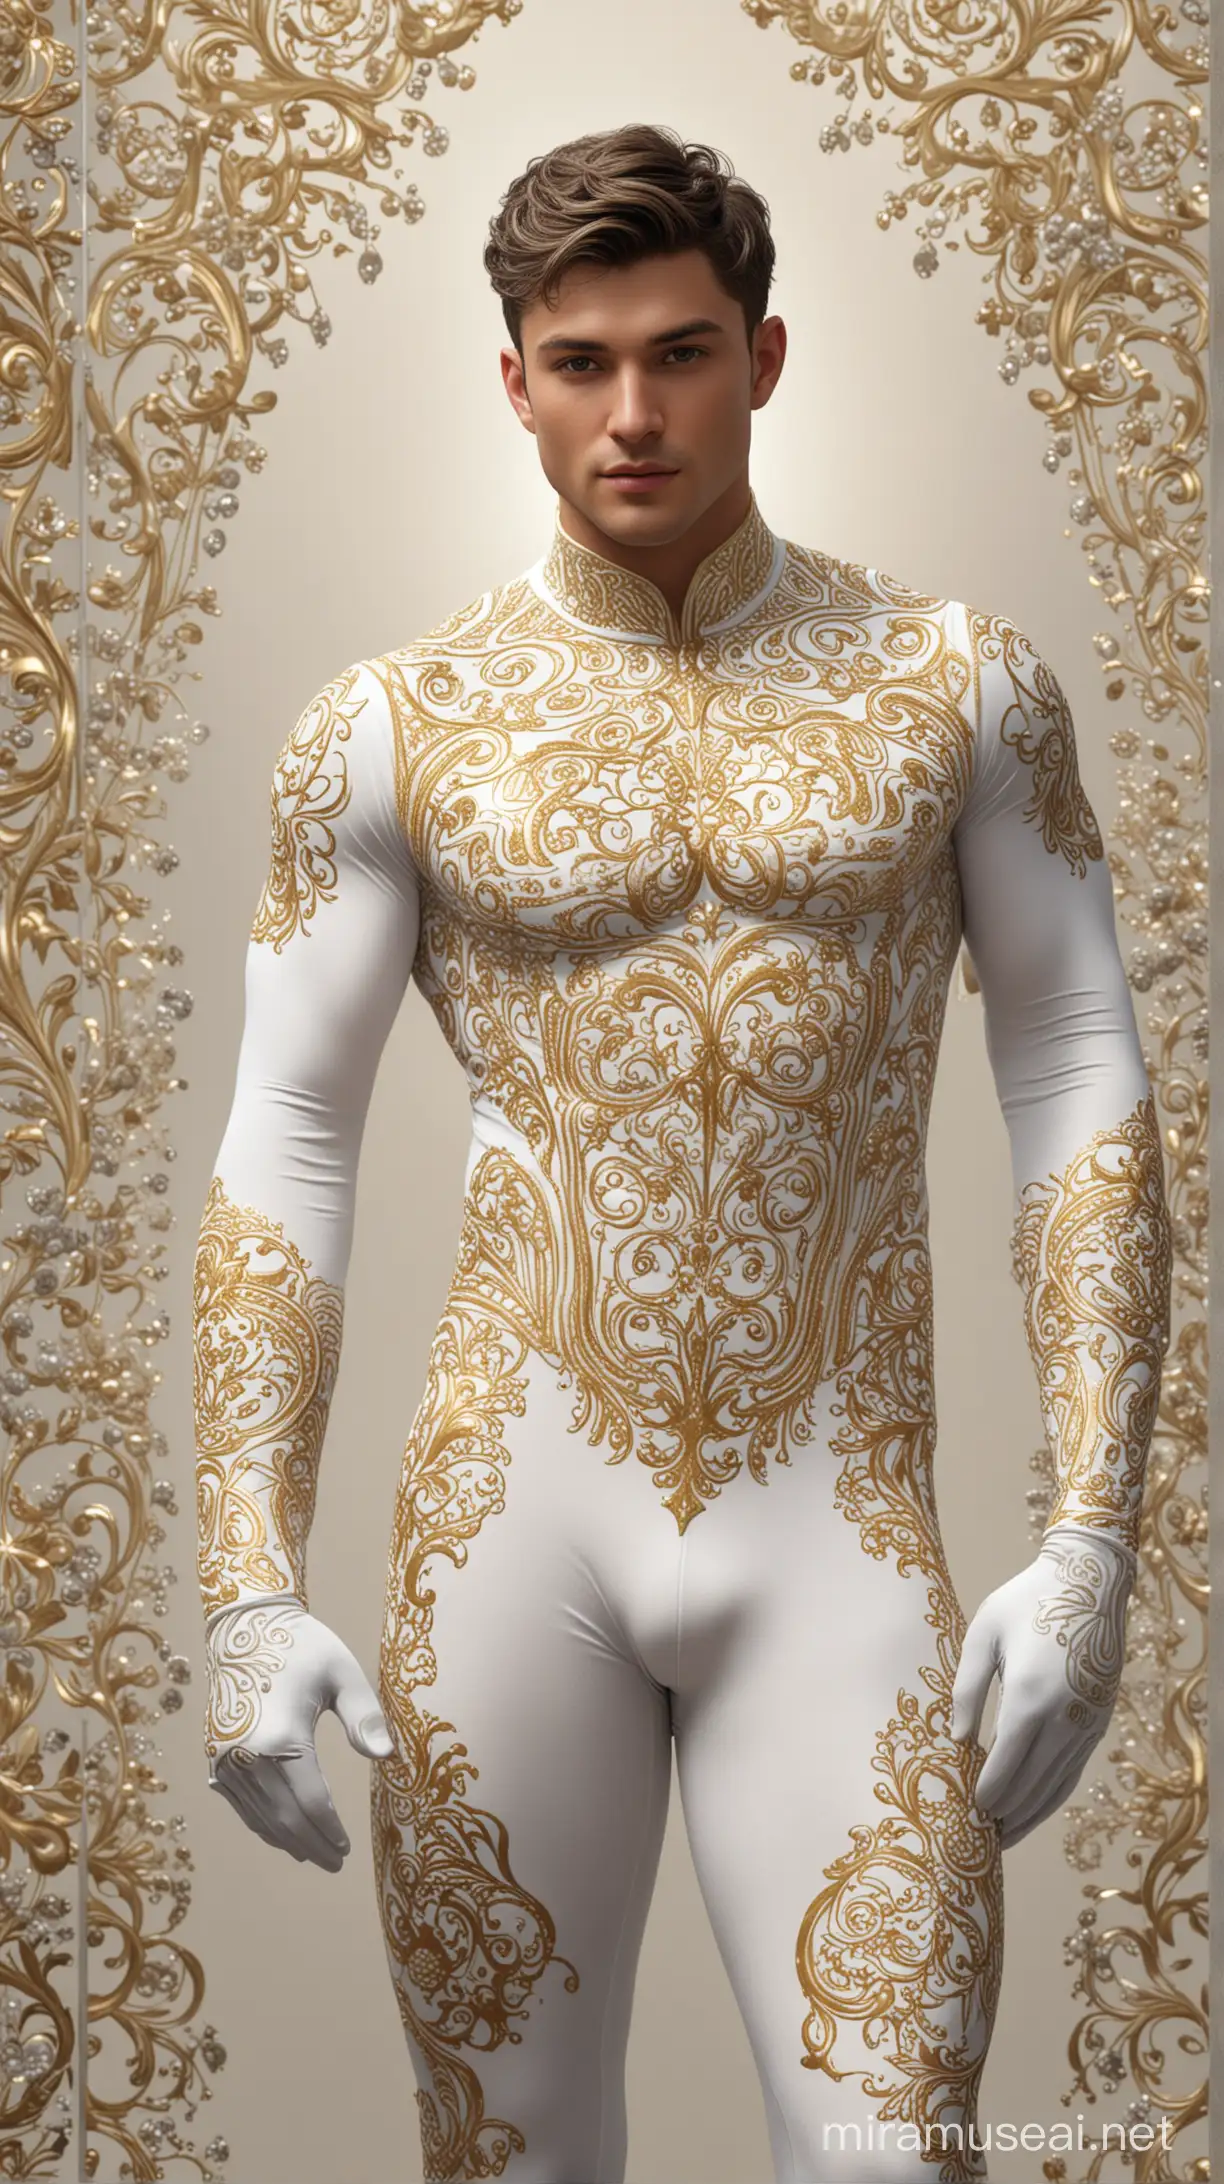  Full full body photorealistic ultra realism high definition aesthetic stabilized diffusion picture of handsome hunky fractal clean shaven  Zayne as celestial Teng, wearing white and gold waves filigree sparkling biomorphic transparent overall tight fit spandex and gloves., standing firmly,, face and body frontal camera focus. hand on the hips.